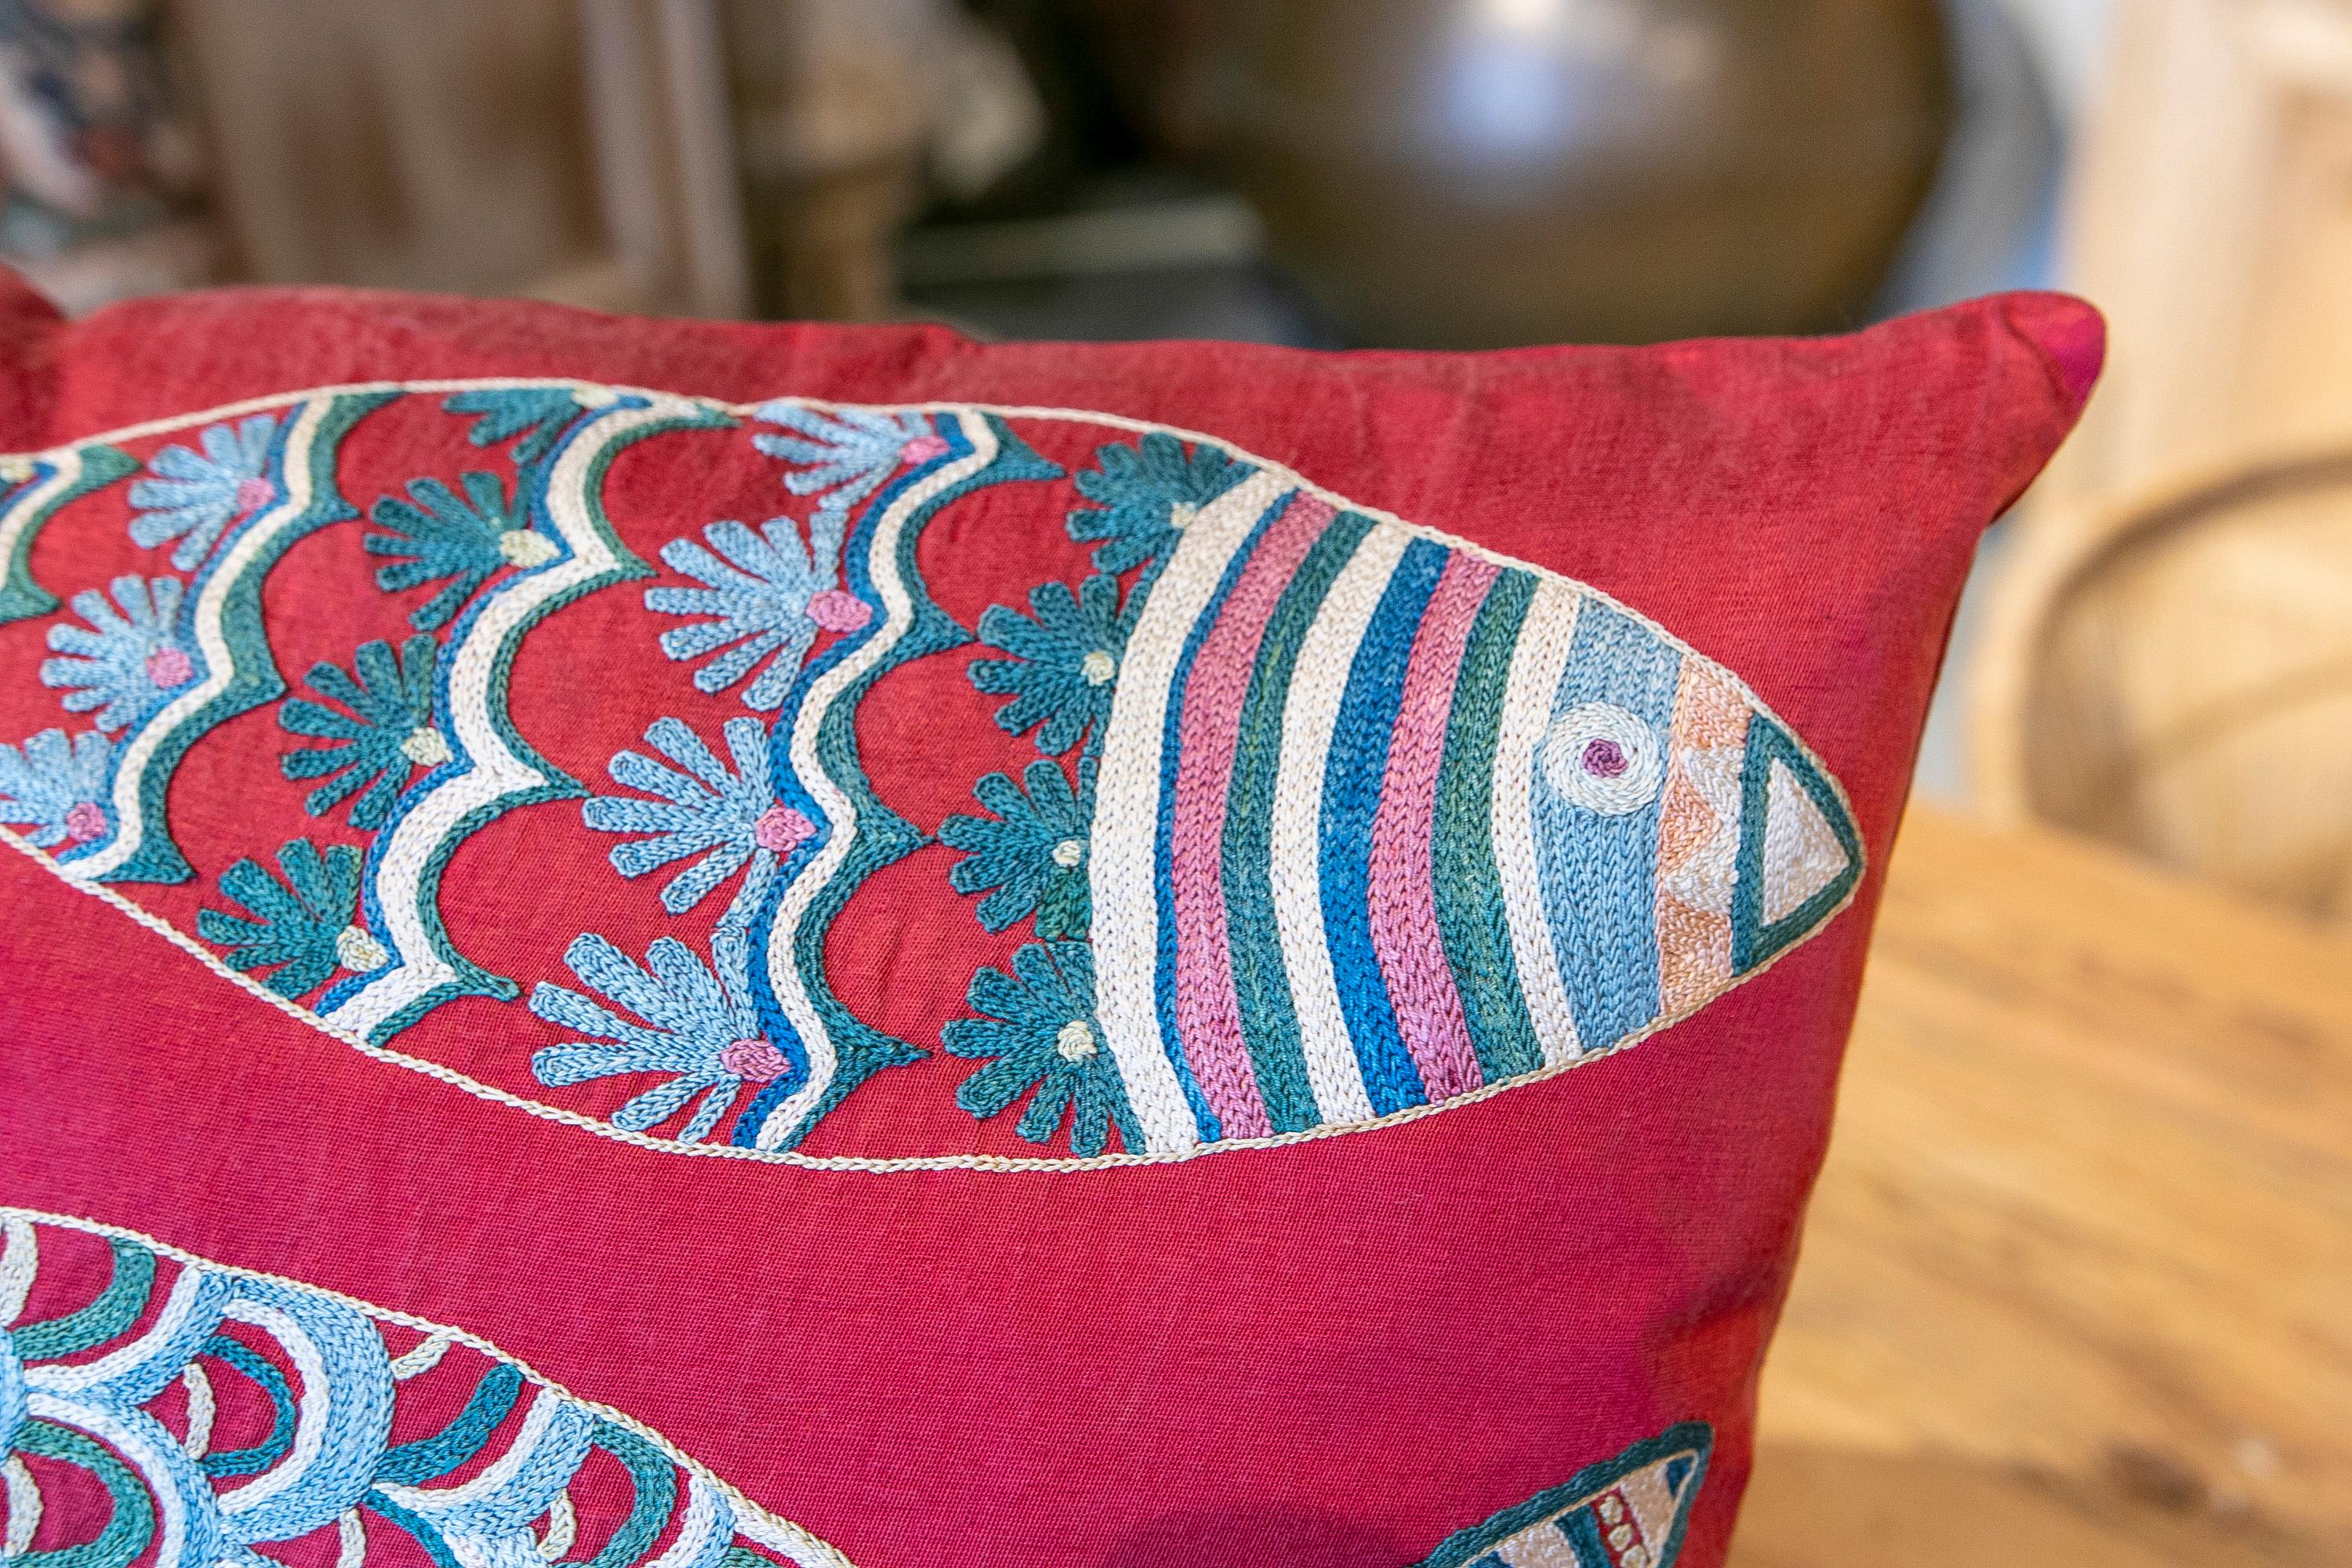 Hand-Woven Uzbekistan Suzani Cushion made of Silk and Cotton Fabric in Bright Colours